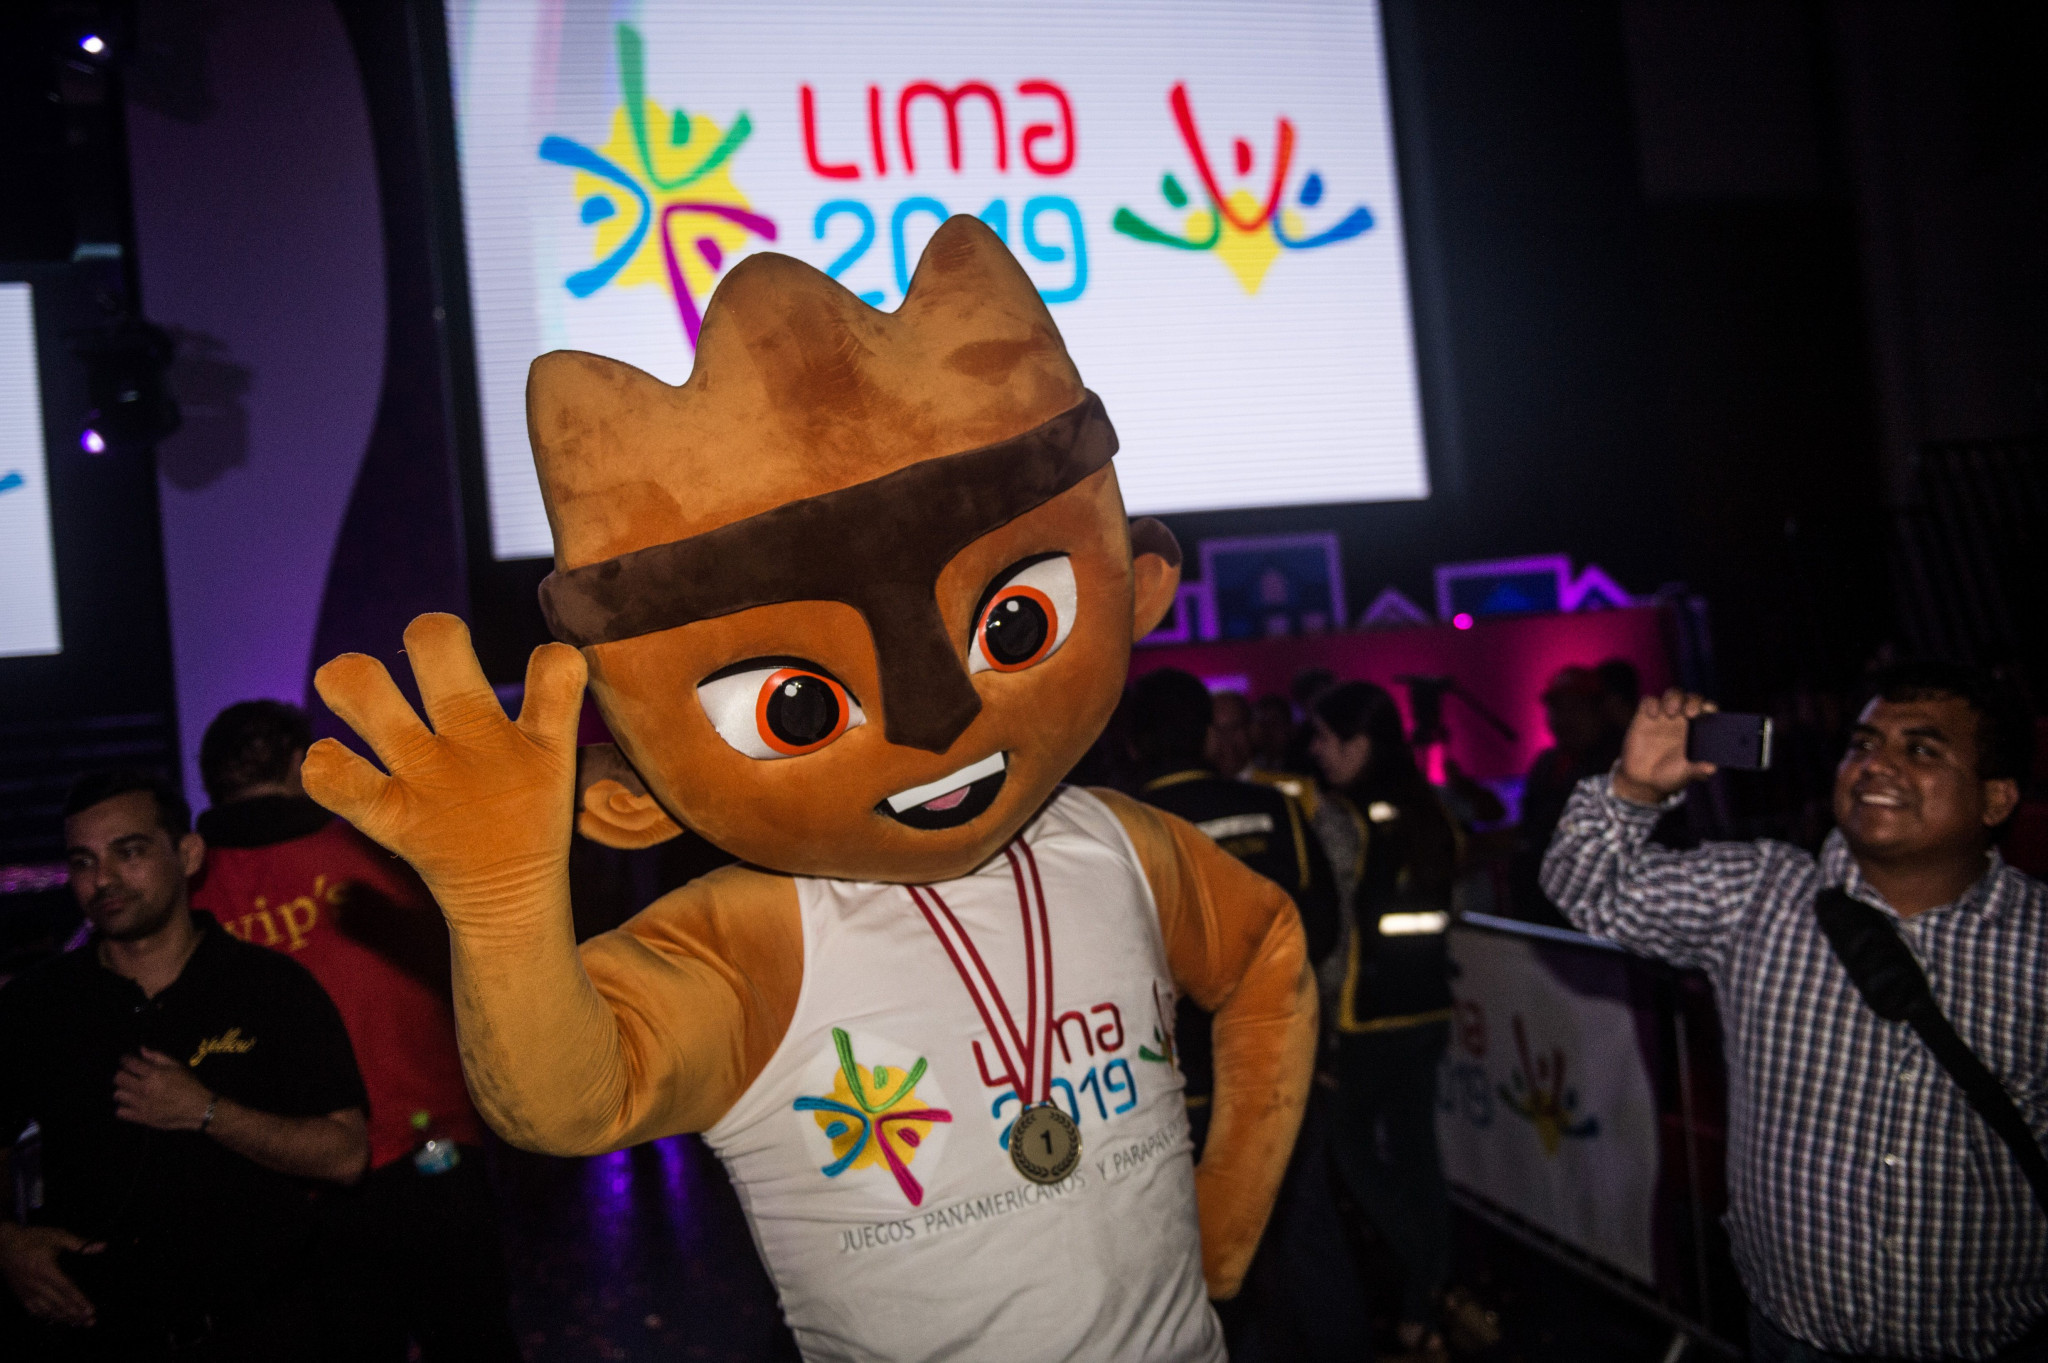 Milco, the mascot for the Lima 2019 Pan American and Parapan American Games, was in attendance at the sports festival outside the National Stadium ©Getty Images